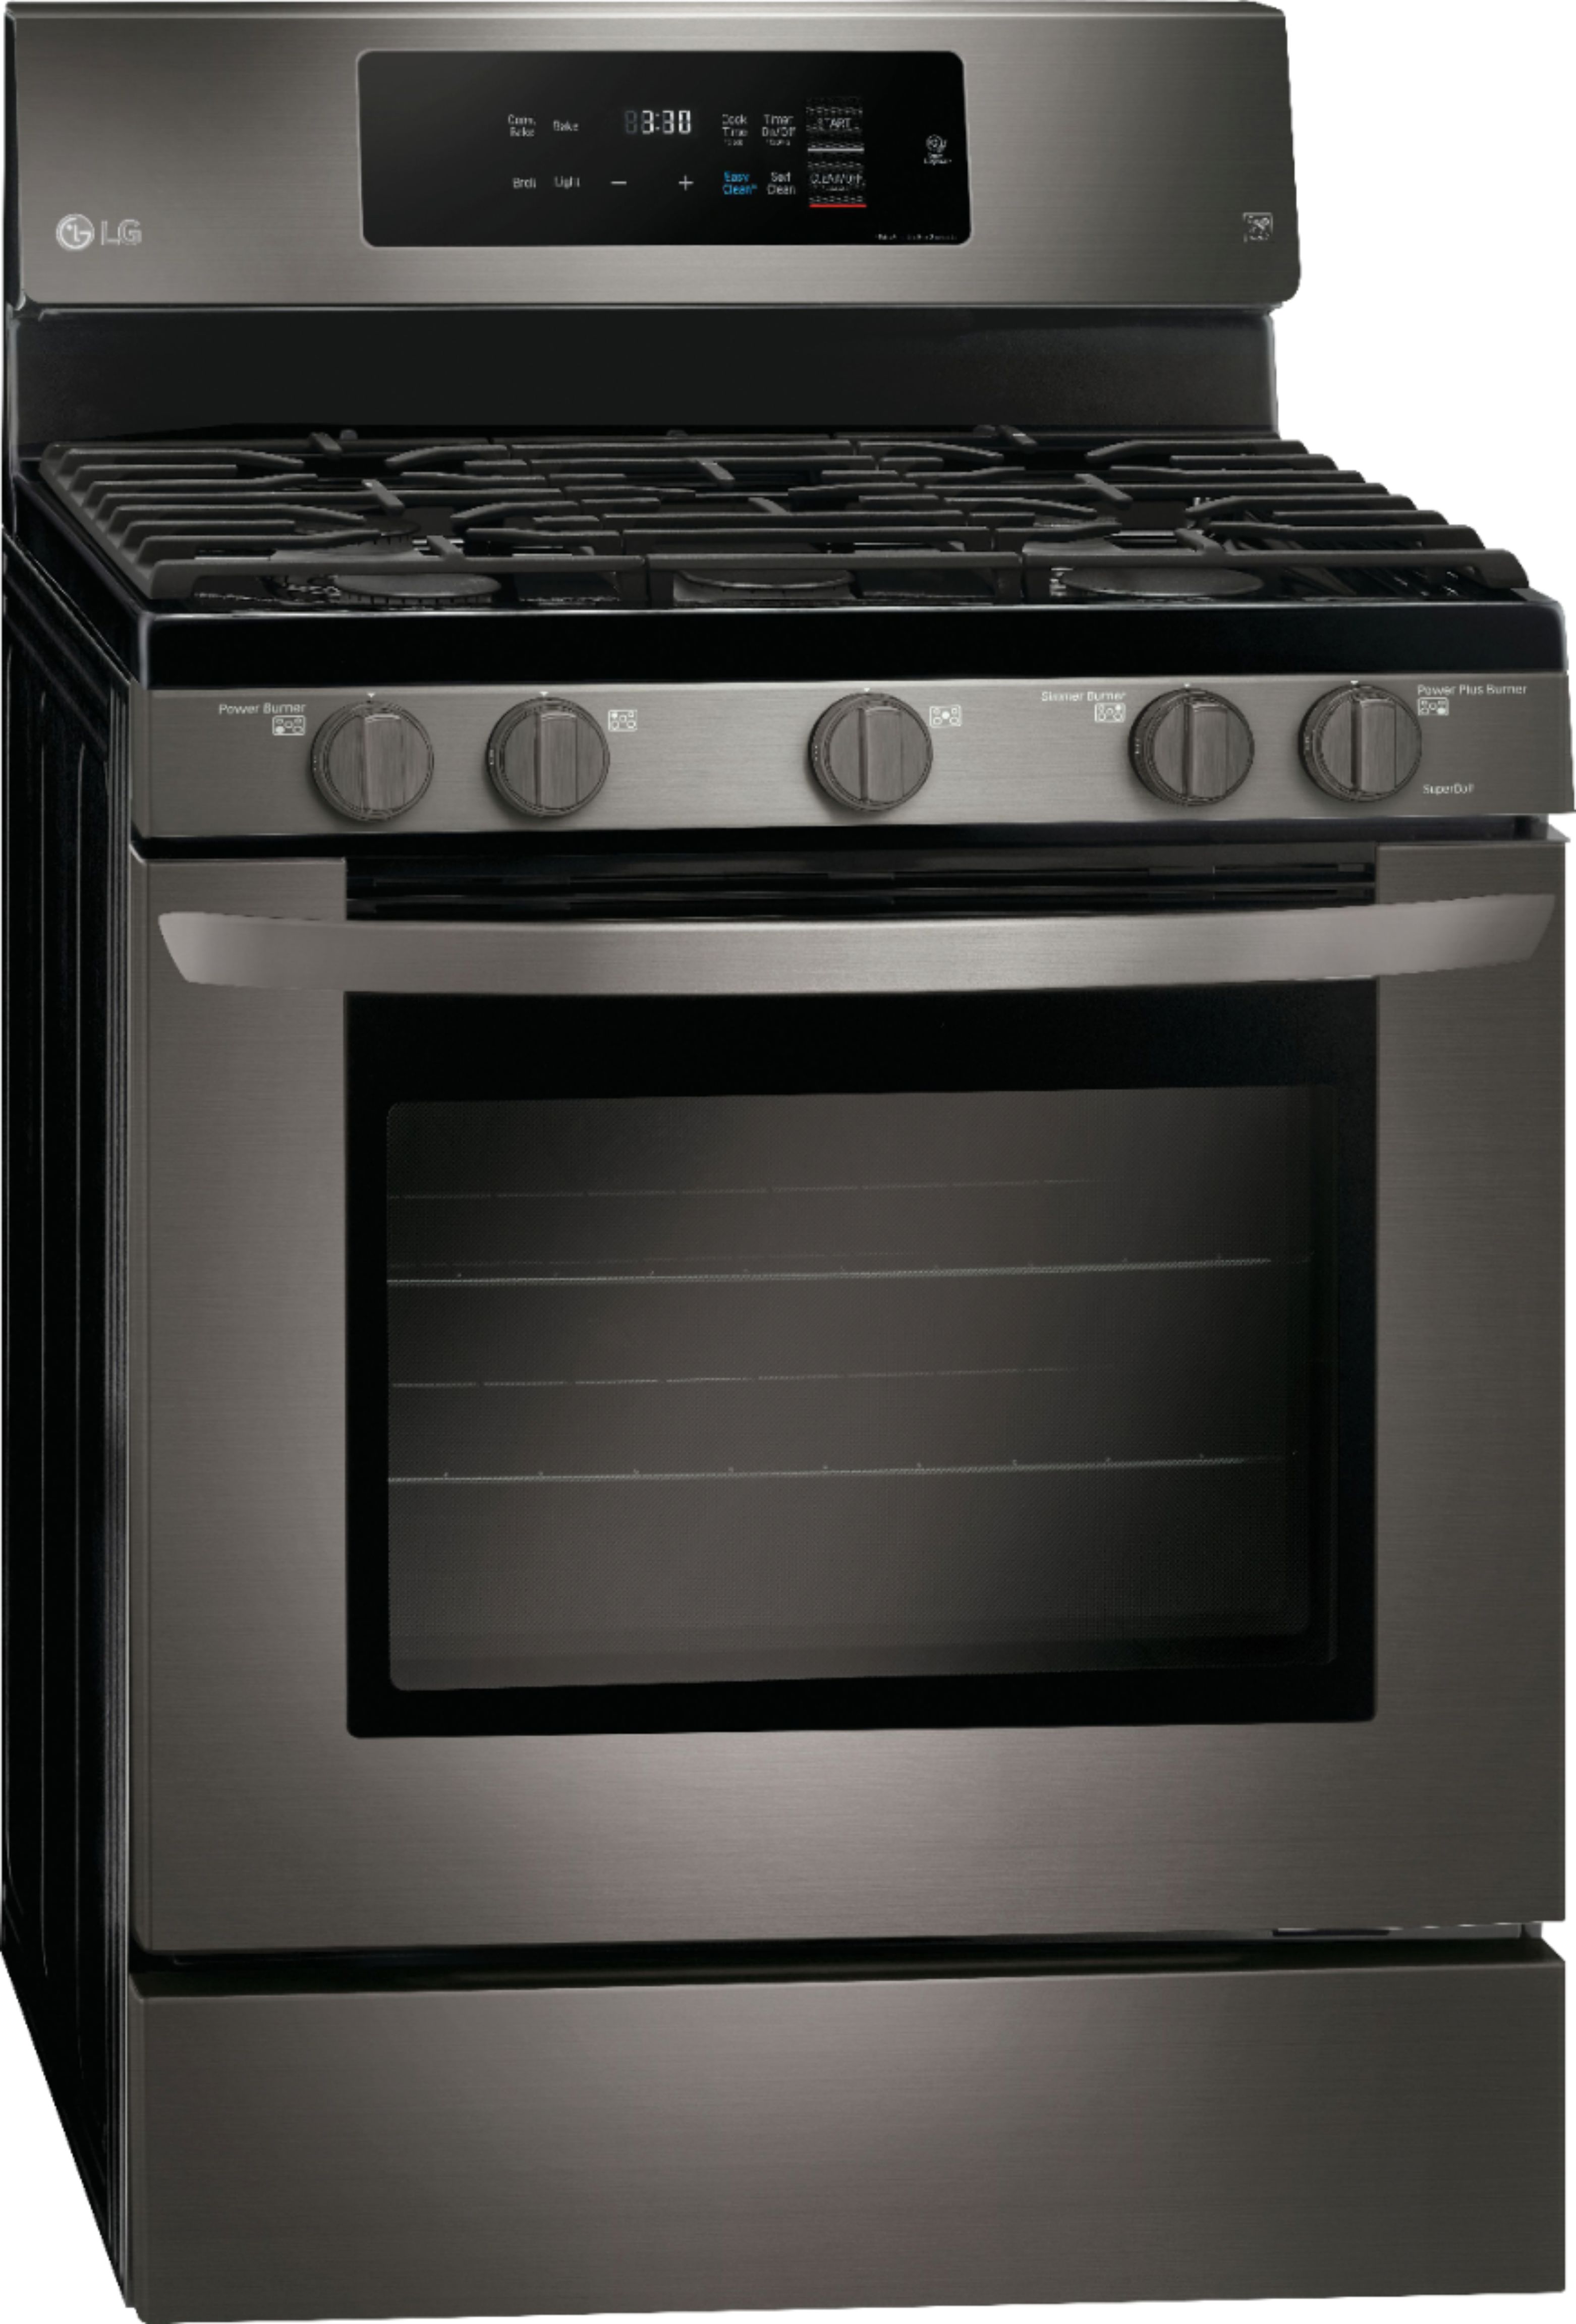 Angle View: LG - 5.4 Cu. Ft. Self-Cleaning Freestanding Gas Convection Range with EasyClean - Black stainless steel